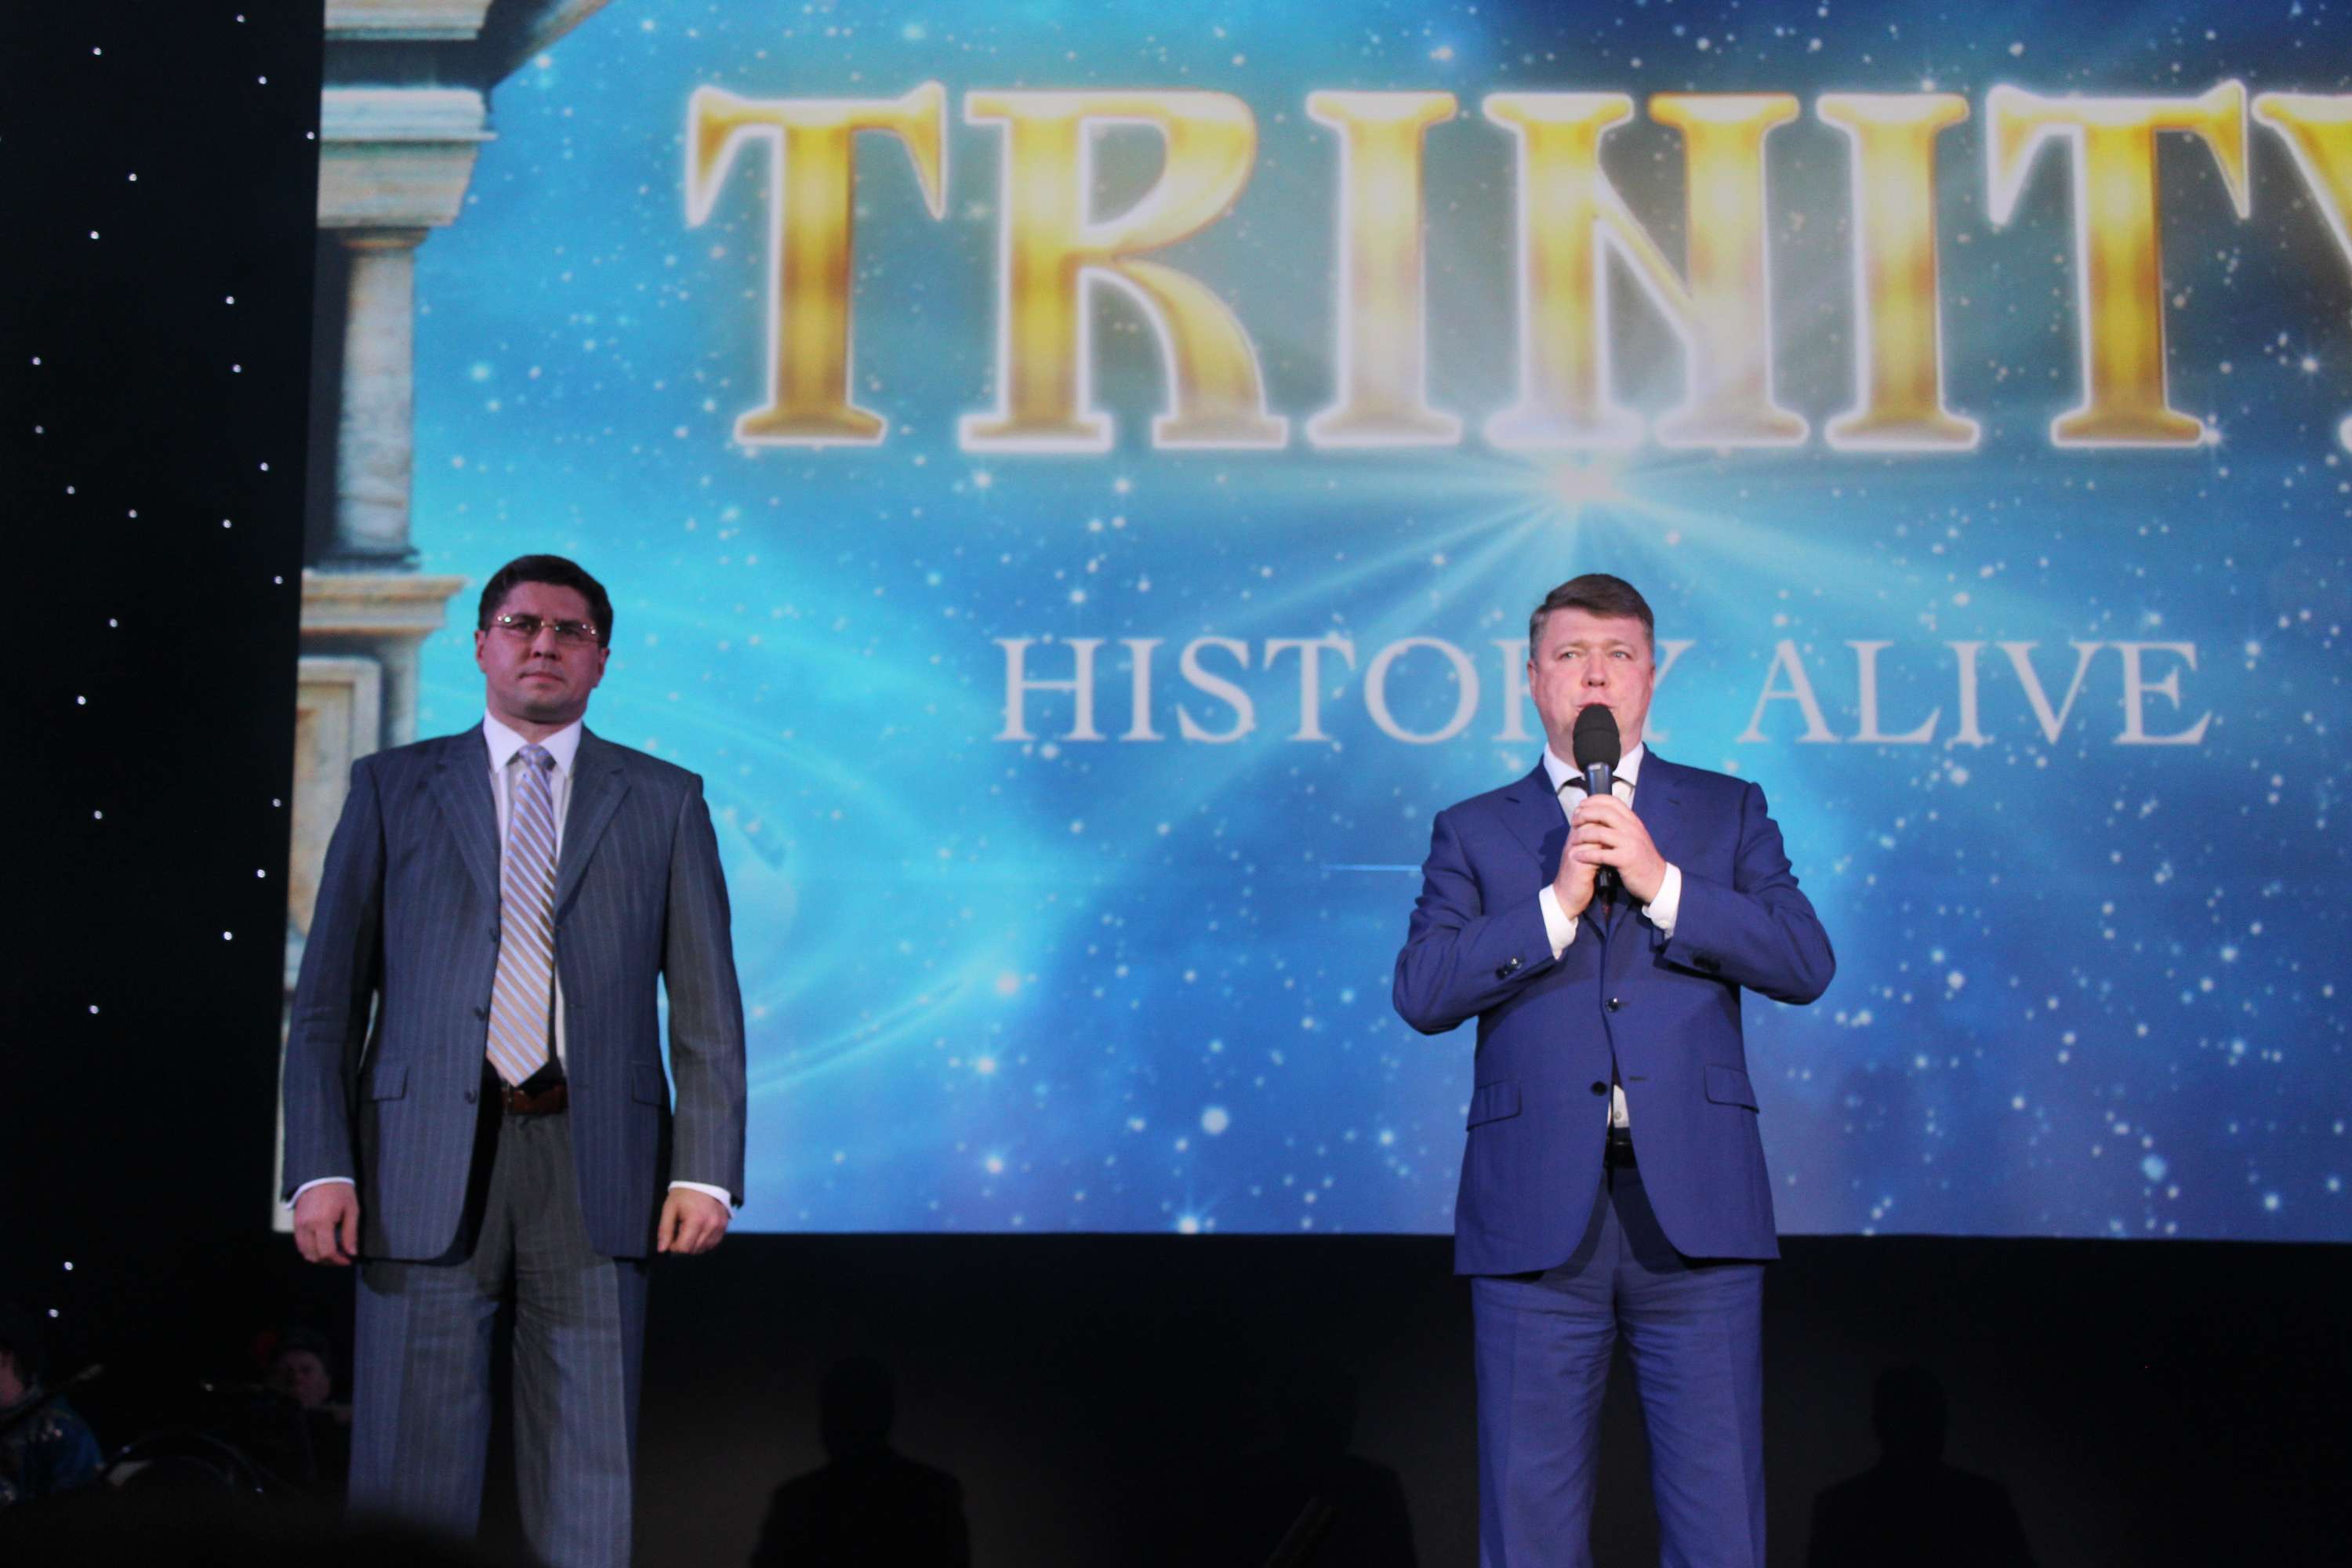 “Trinity. History Alive” officially launched